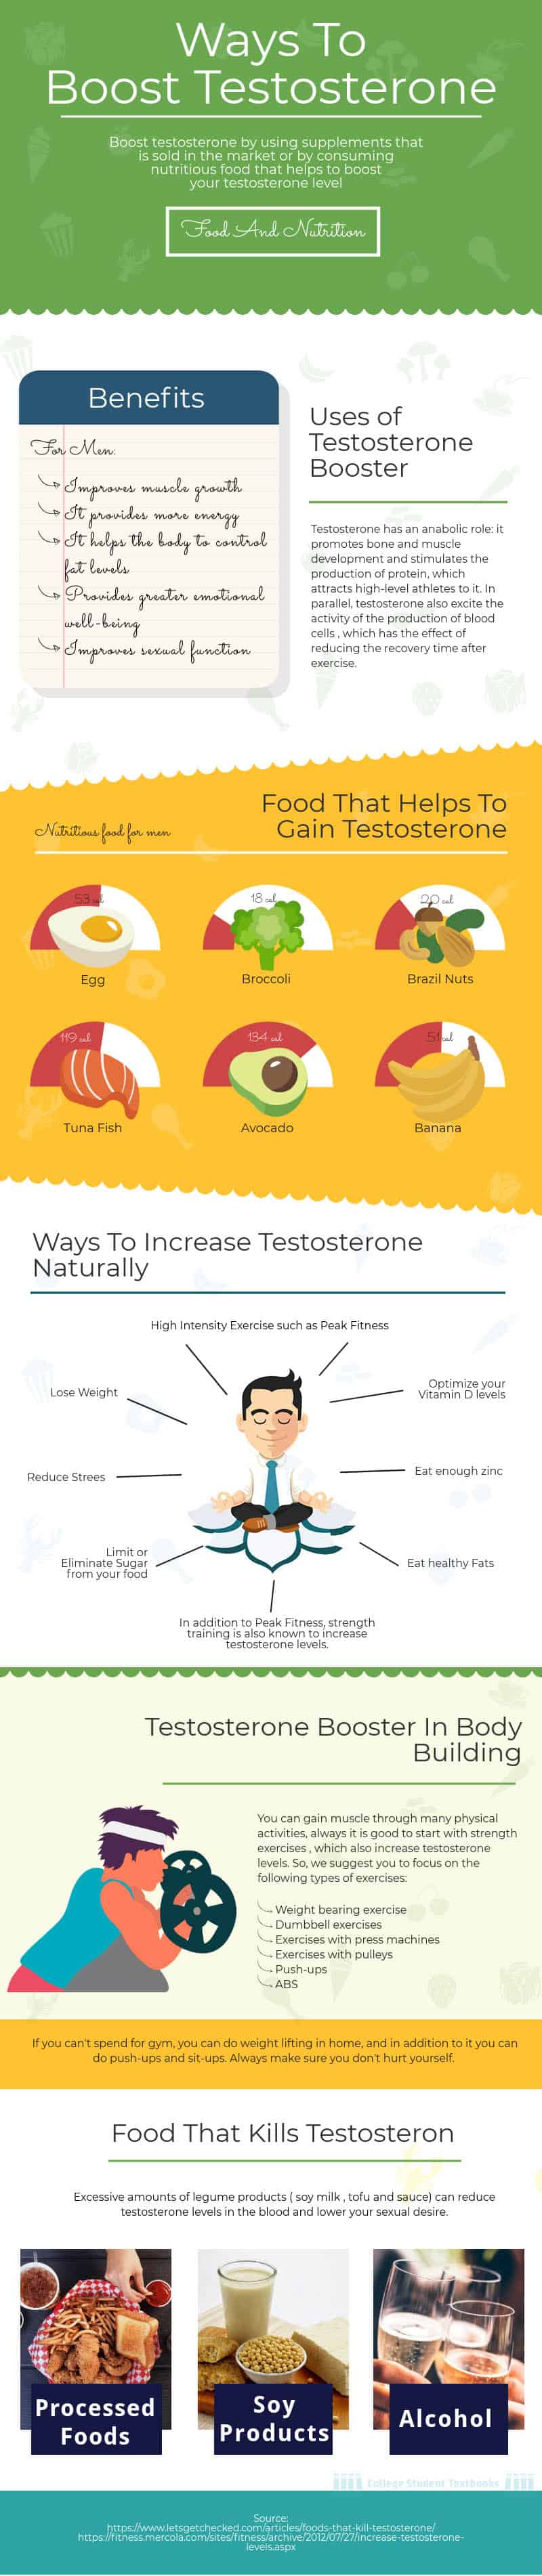 Ways to boost testosterone - infographic